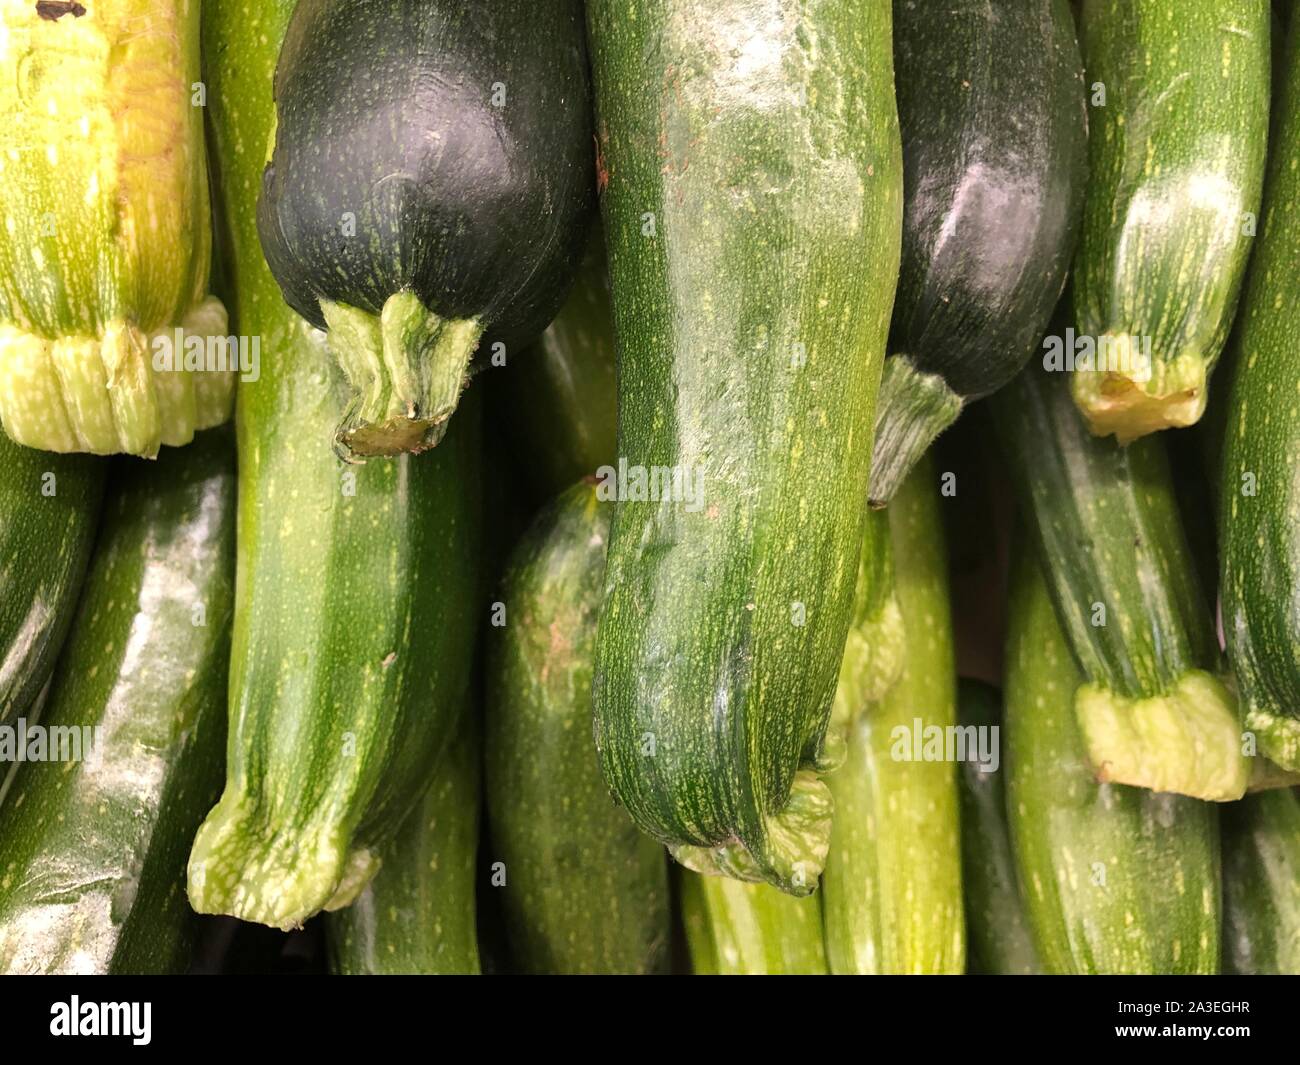 green zucchini harvest, healthy nutritious vegetable ingredient for cooking recipes, diet food that is fresh and raw Stock Photo